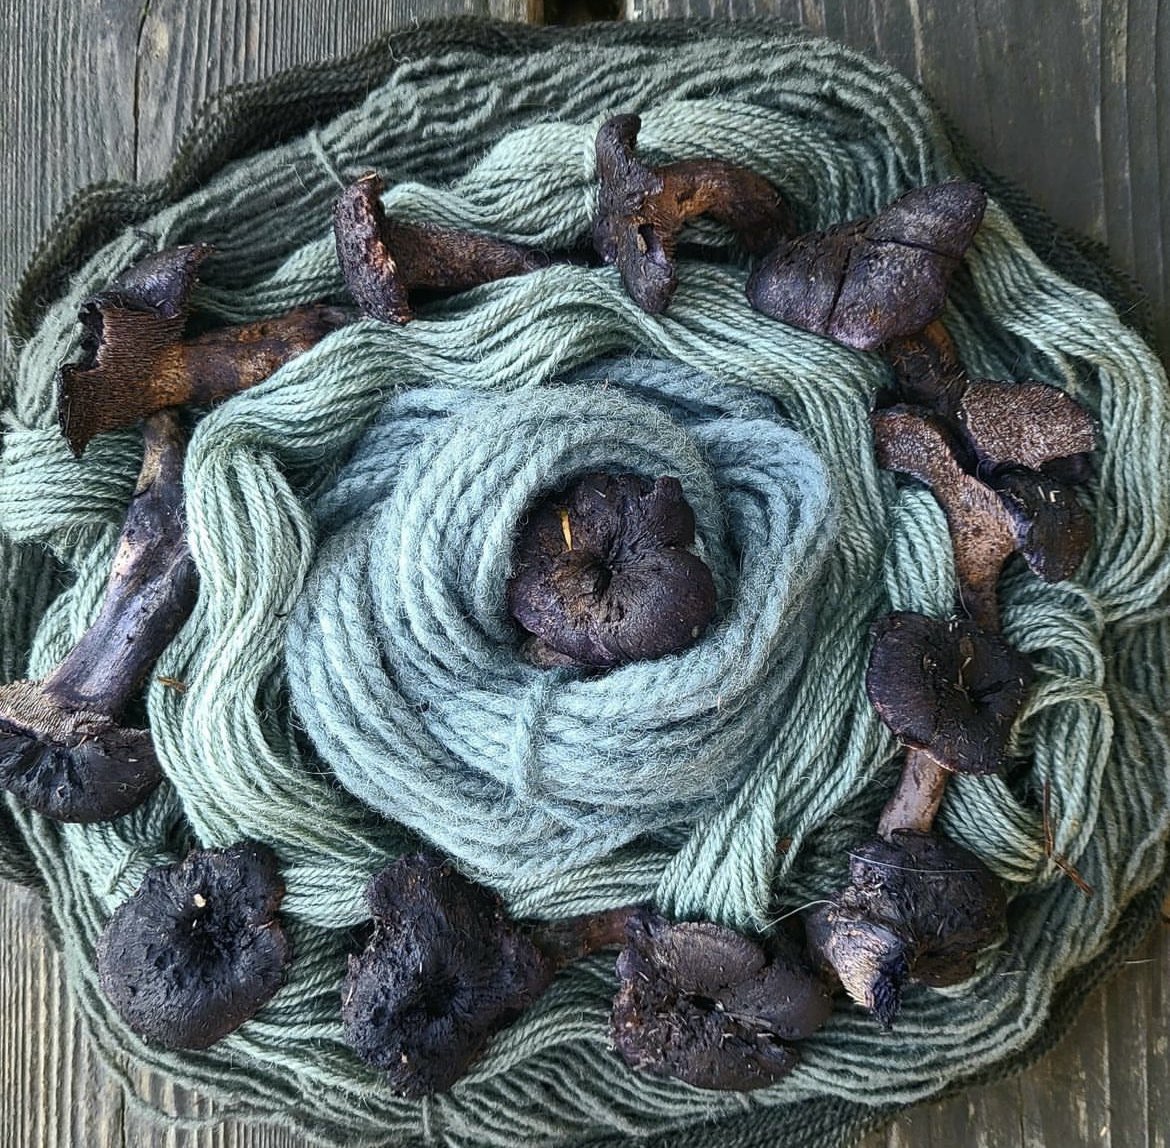 Just a mushroom called a violet hedgehog dyeing yarn the most delicious shade of blue. Not sure this one grows in Scotland. By Paula Stockdale, British Columbia. instagram.com/florafungiandf…